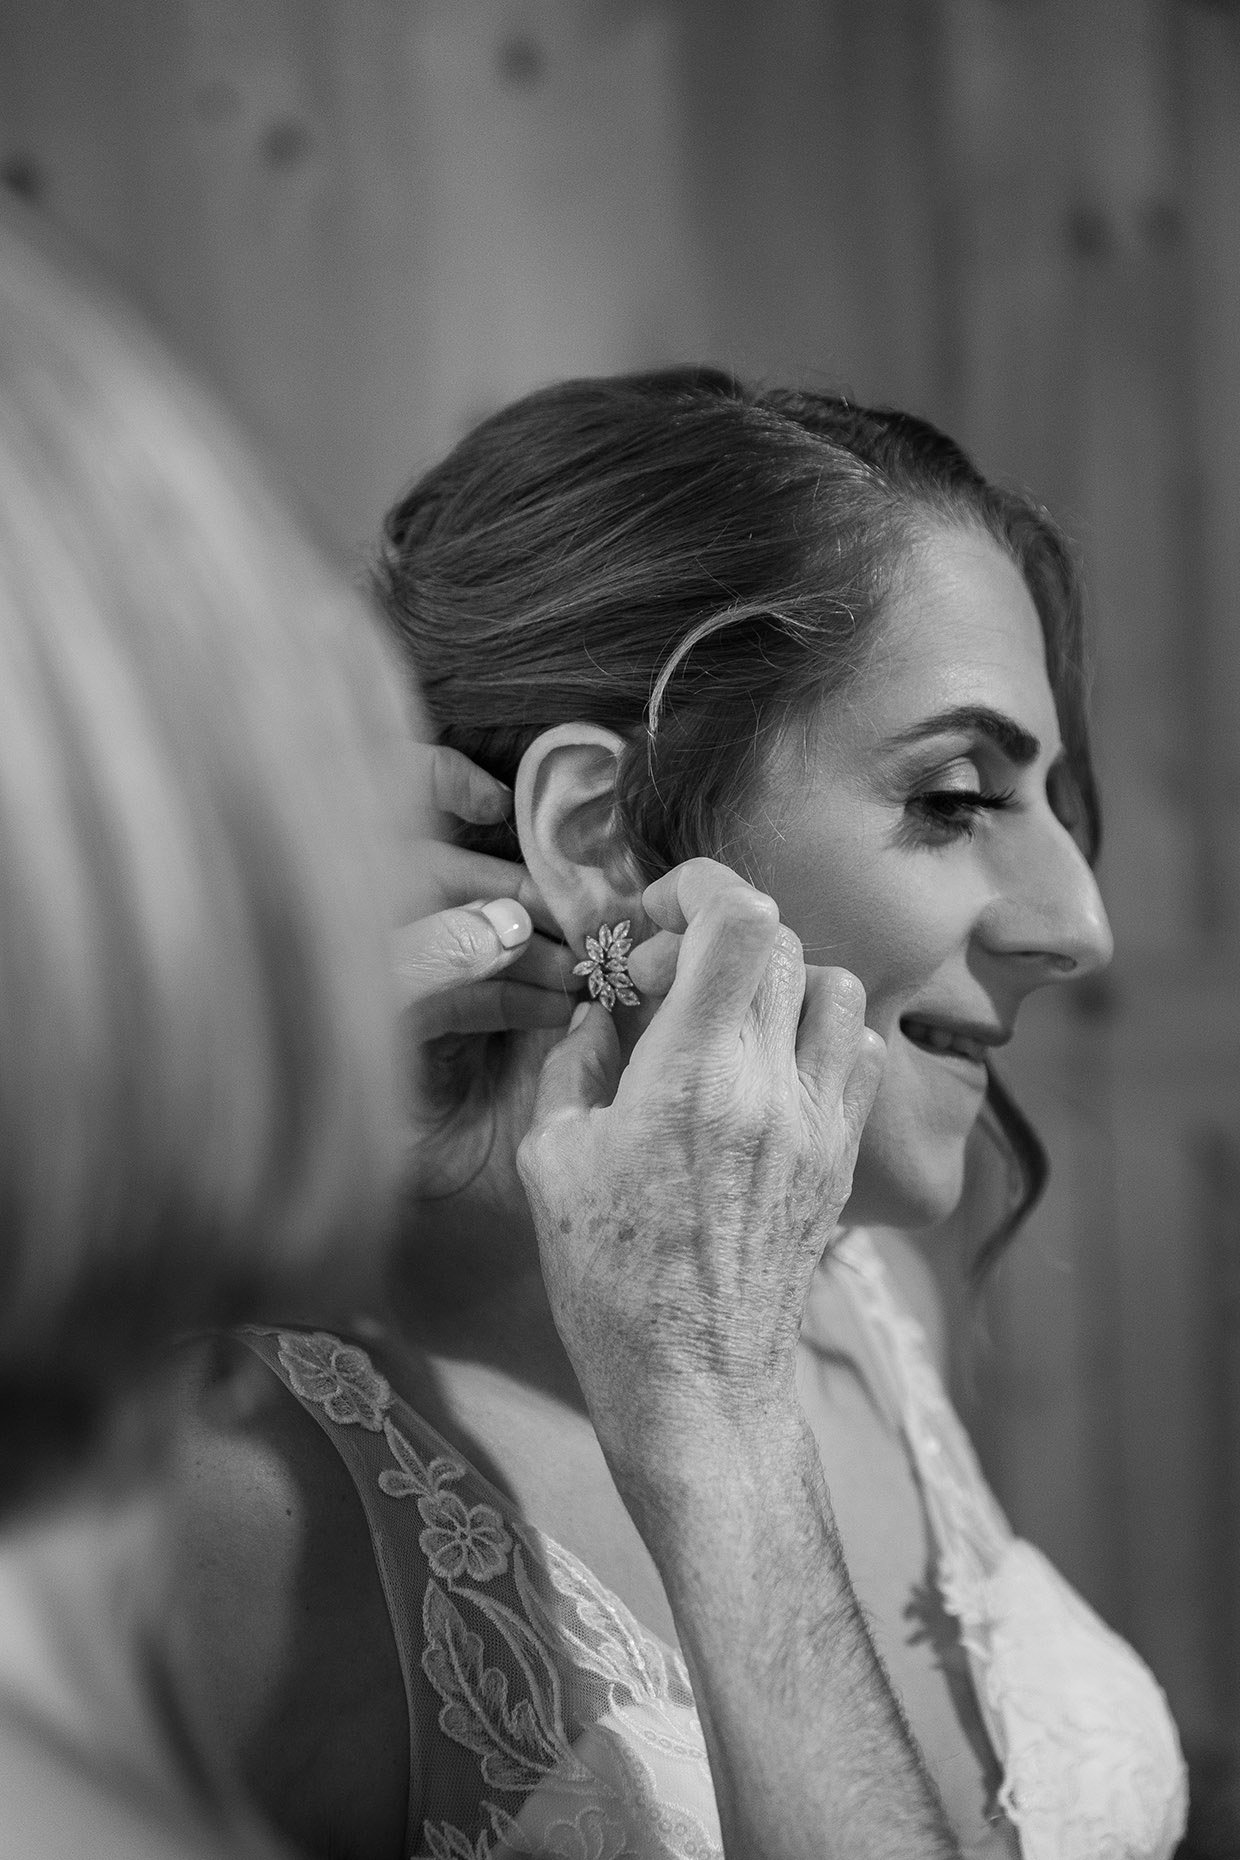 Mother of the bride fixing bride's earrings